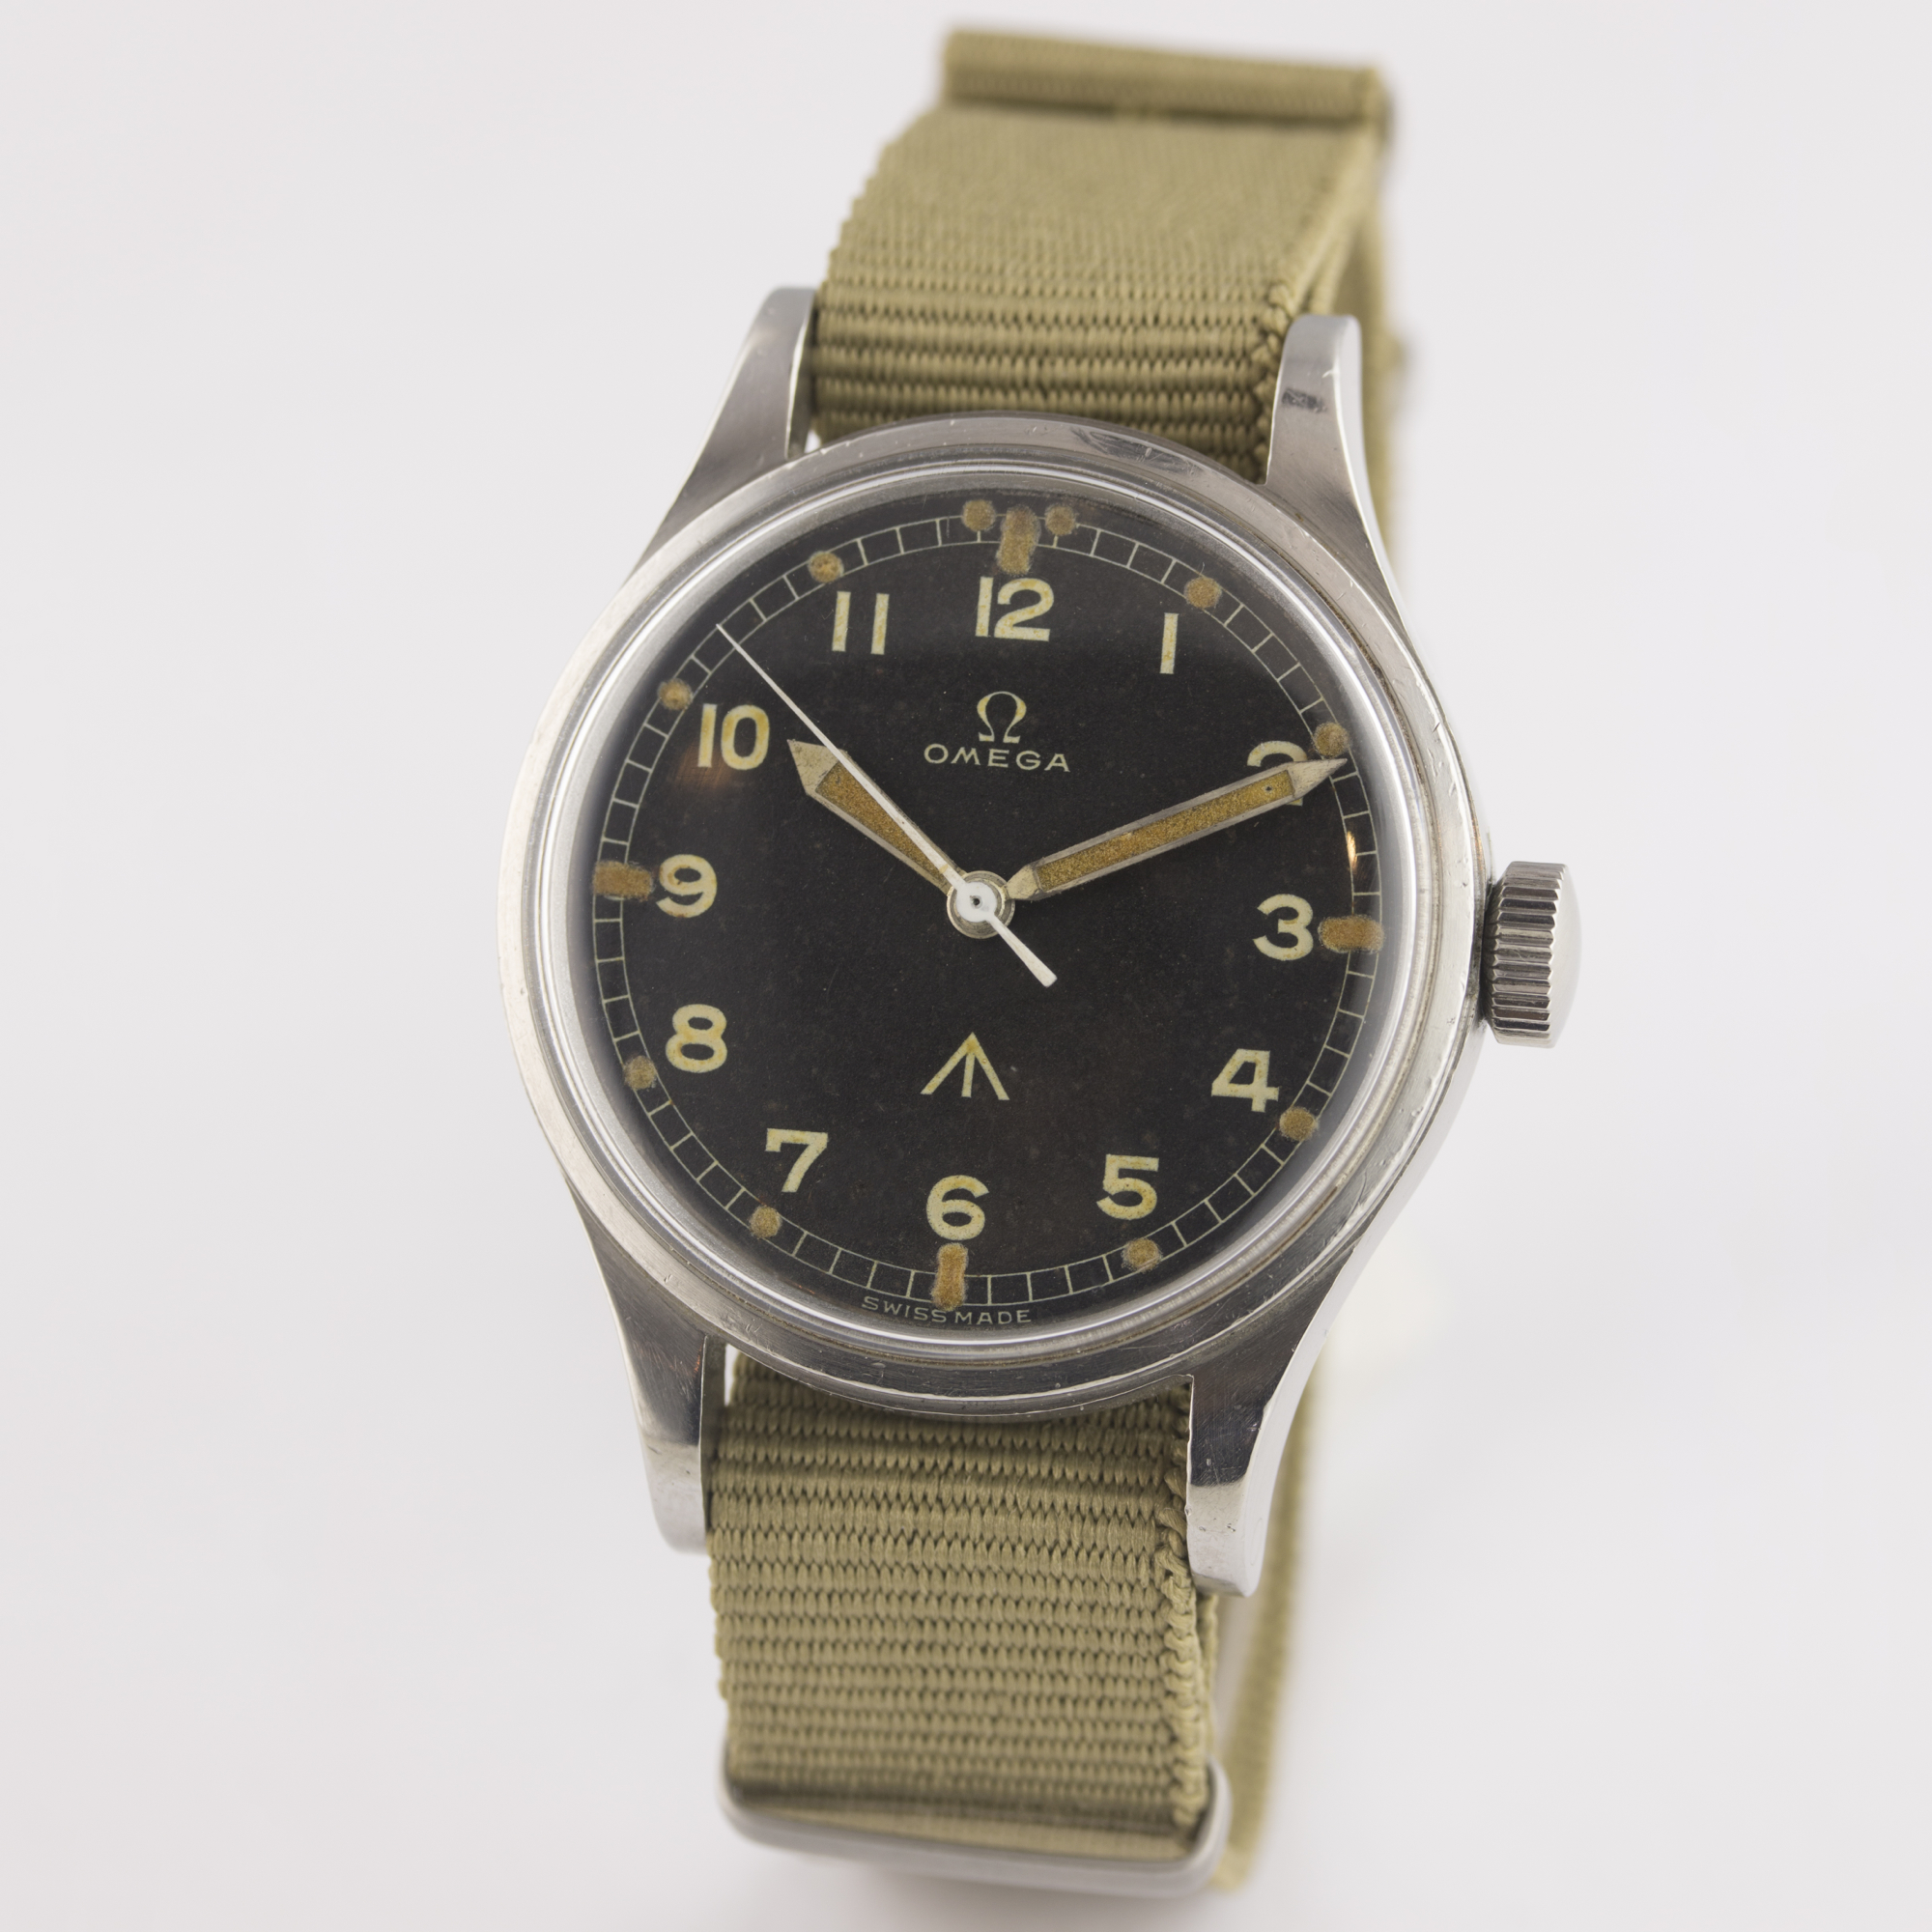 A VERY RARE GENTLEMAN'S STAINLESS STEEL BRITISH MILITARY OMEGA RAF "THIN ARROW" PILOTS WRIST WATCH - Image 3 of 9